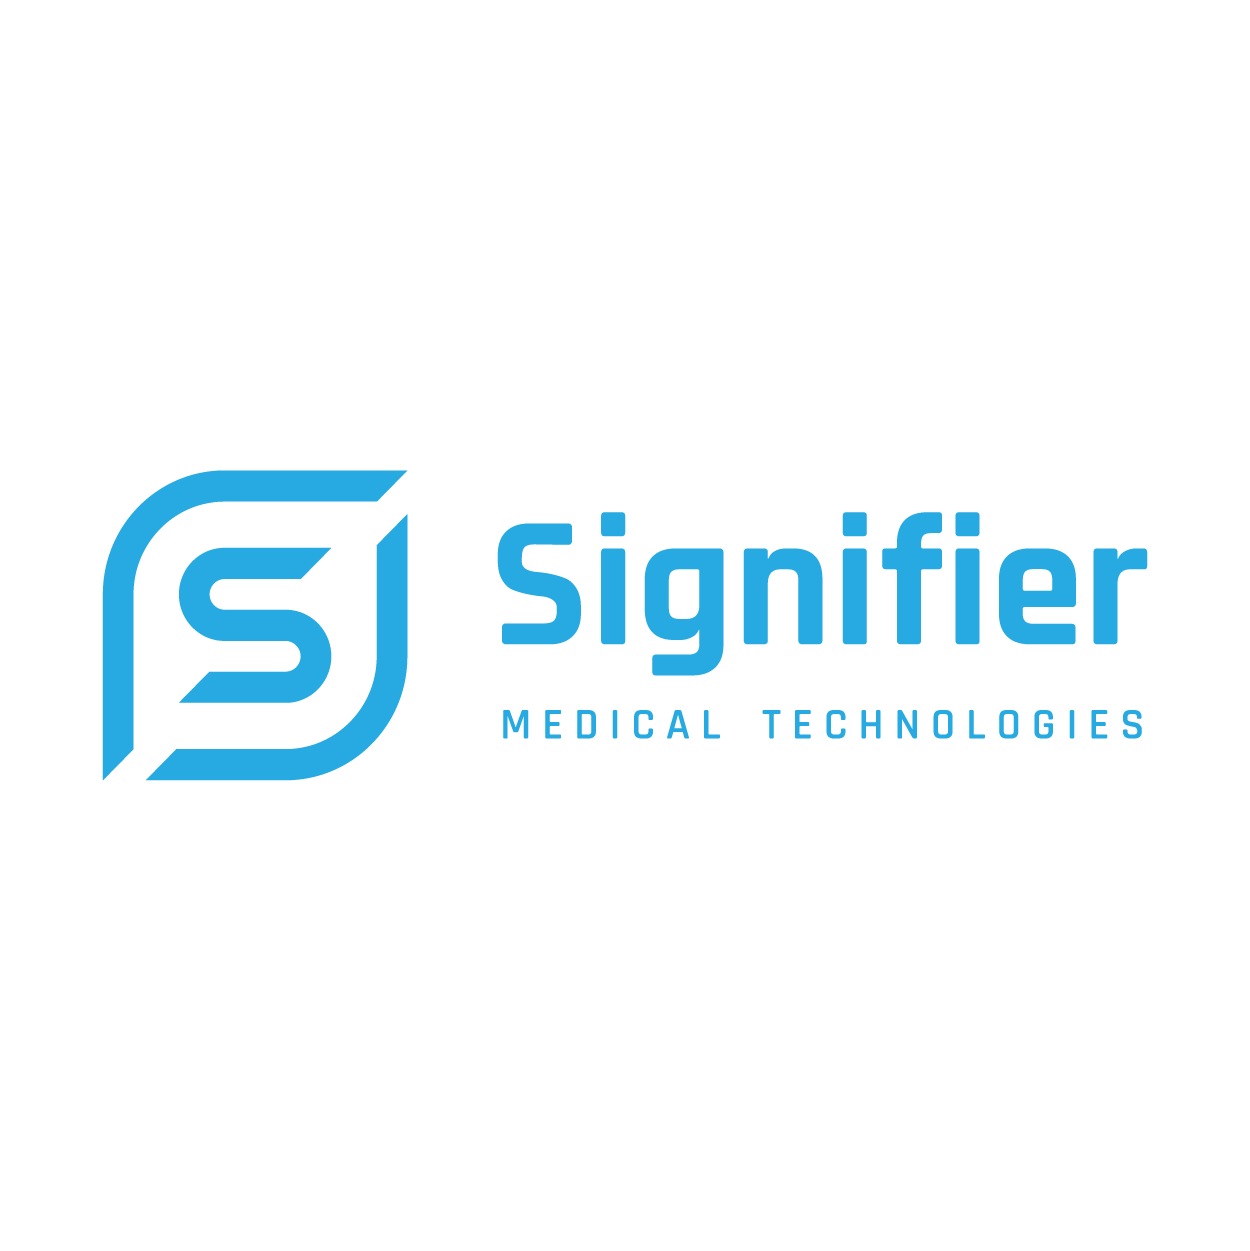 Signifier Medical Technologies